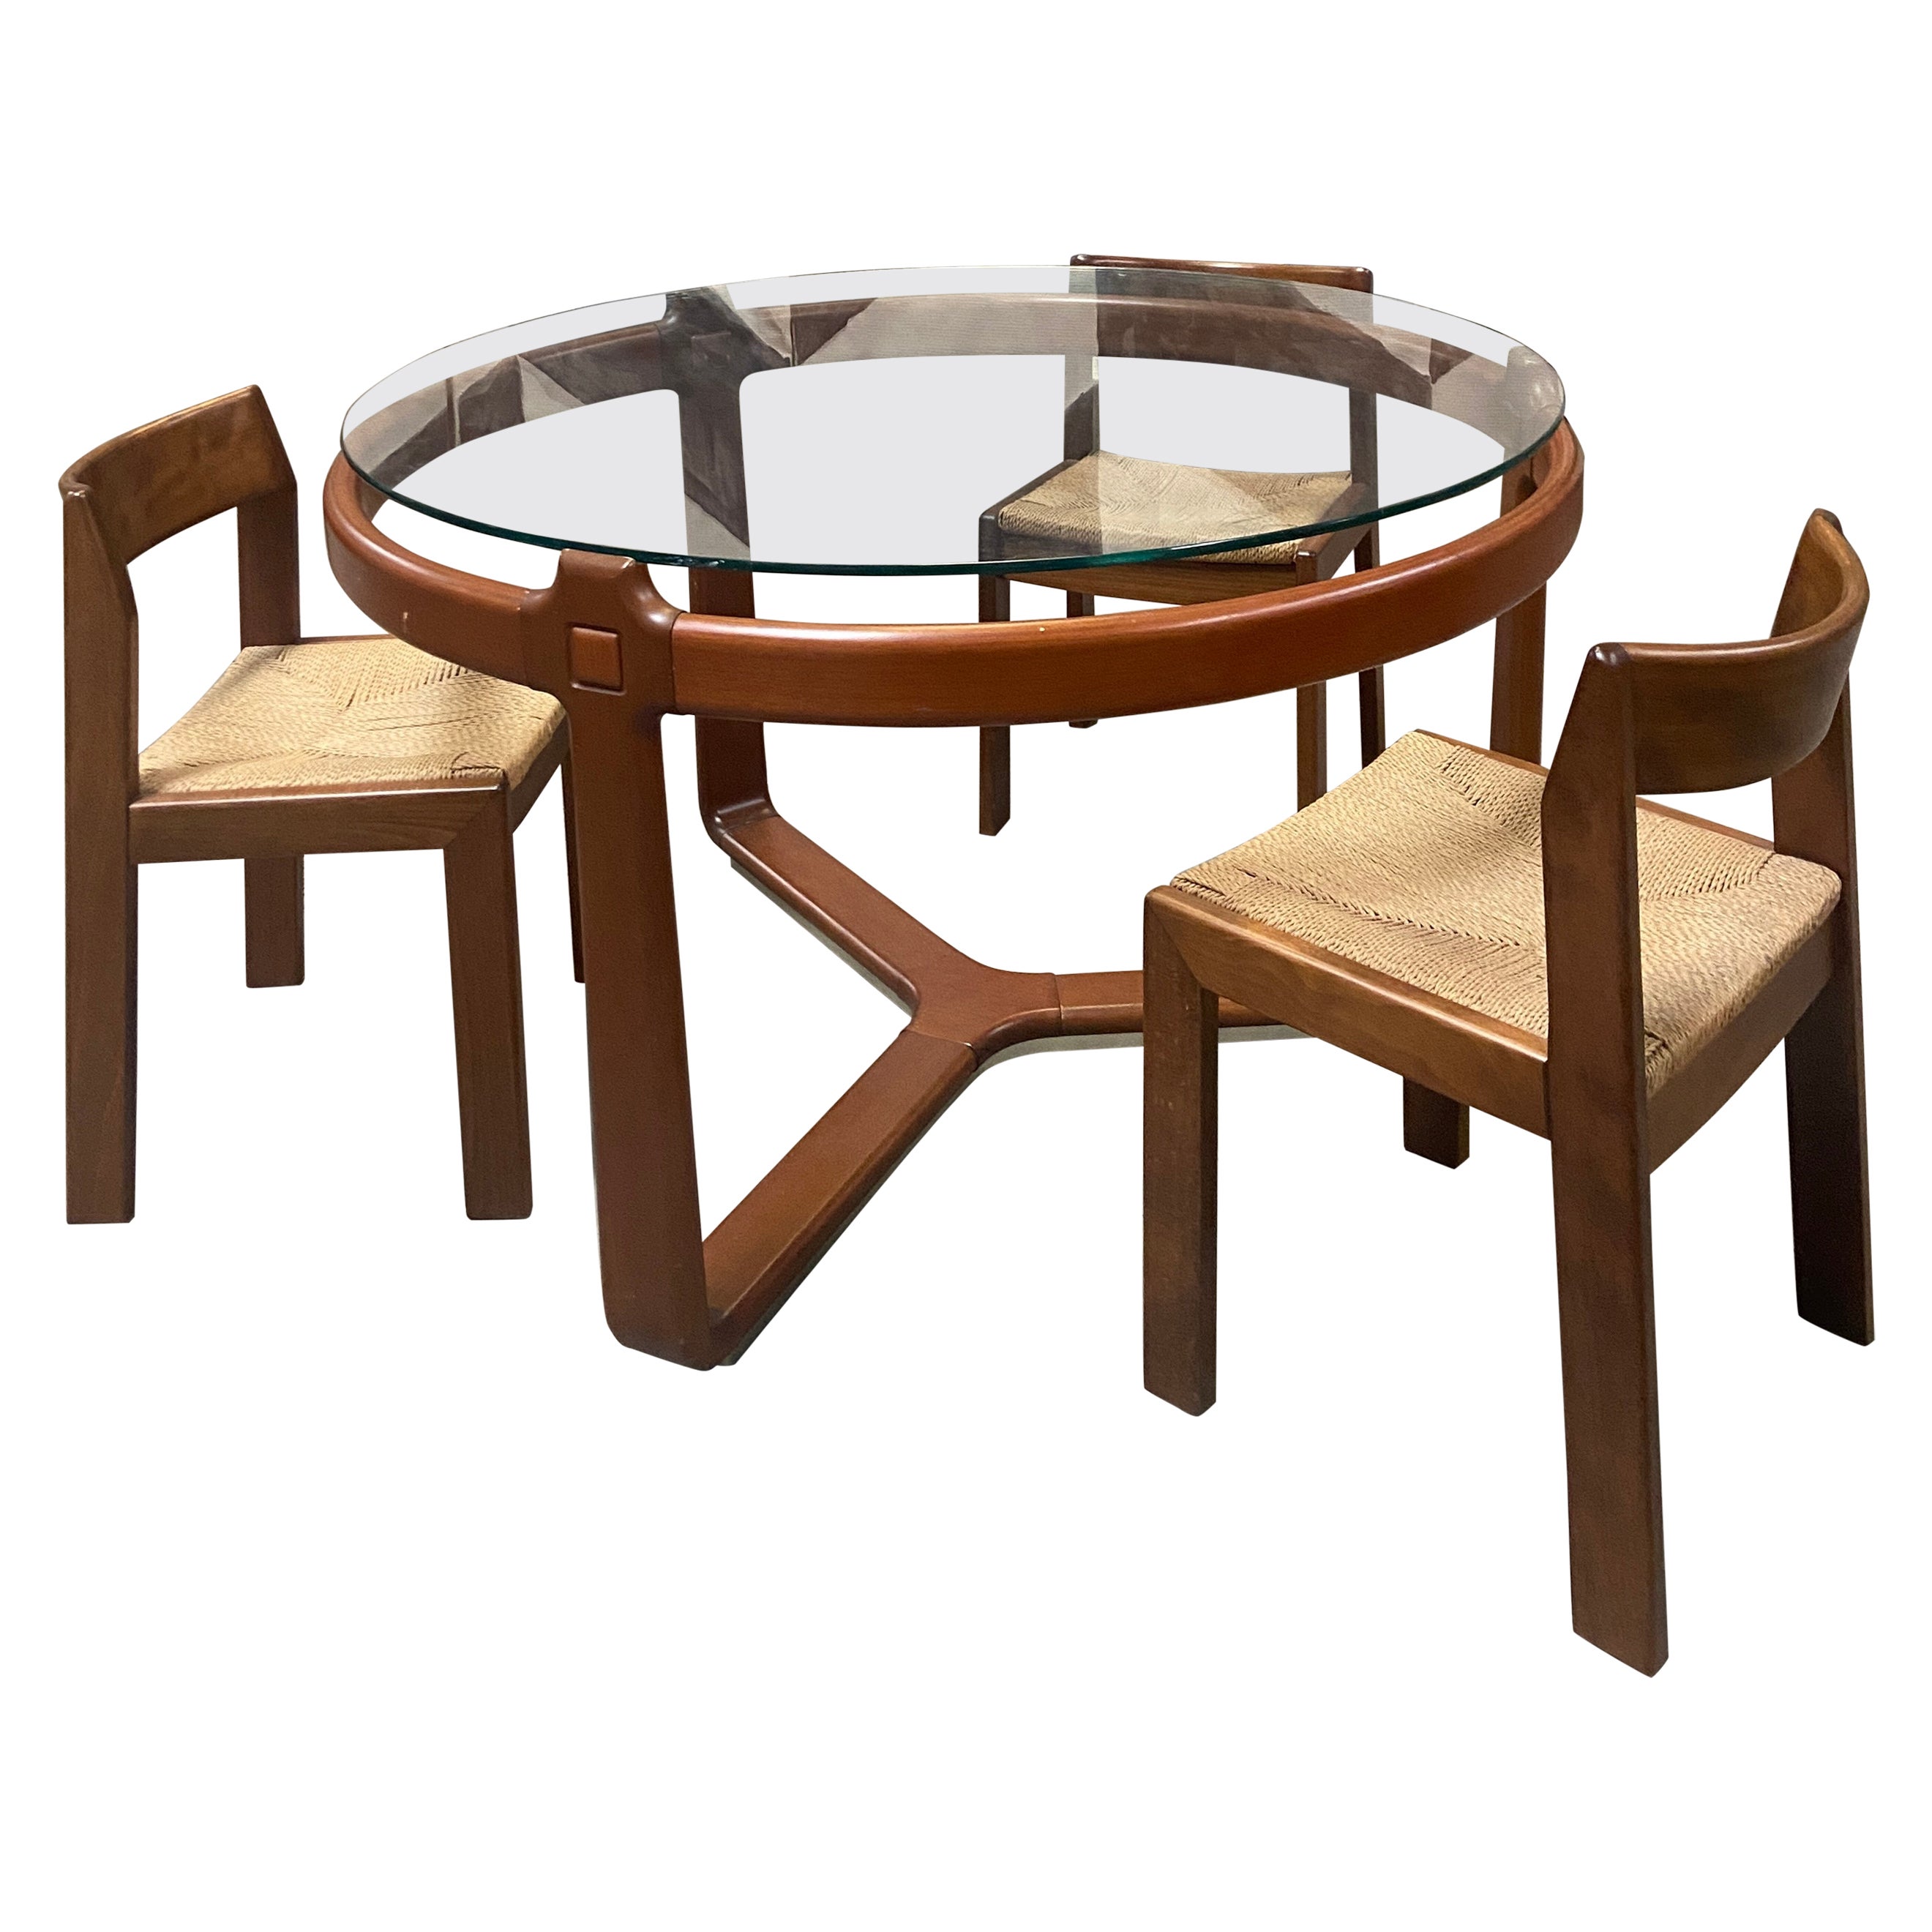 Mid-Century Modern Italian Round Table with Smoked Glass Top and 3 Wooden Chairs